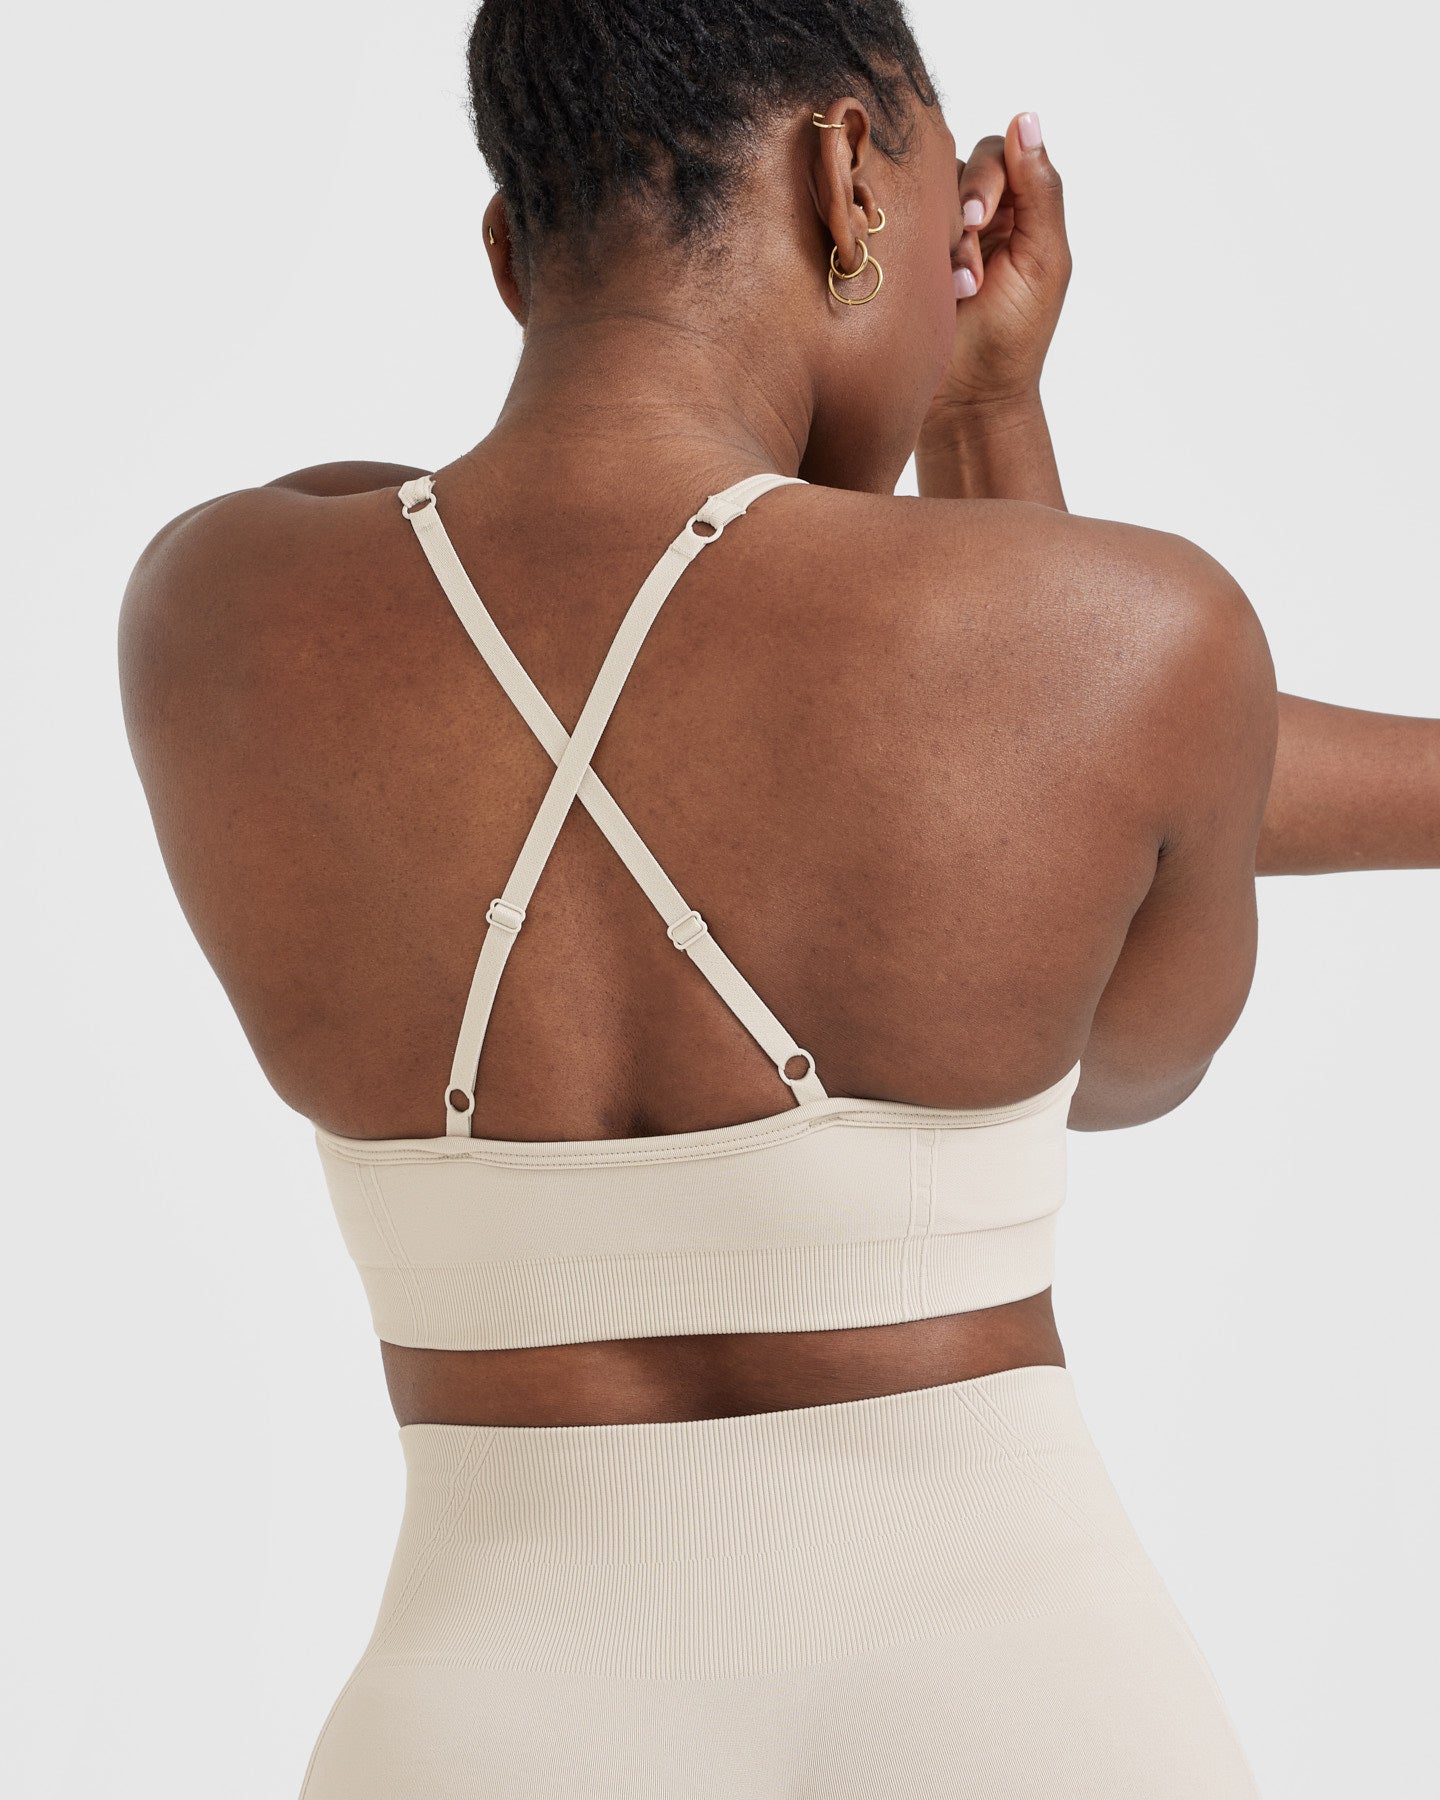 obclassic strappy unpadded bralette – Our Bralette Club